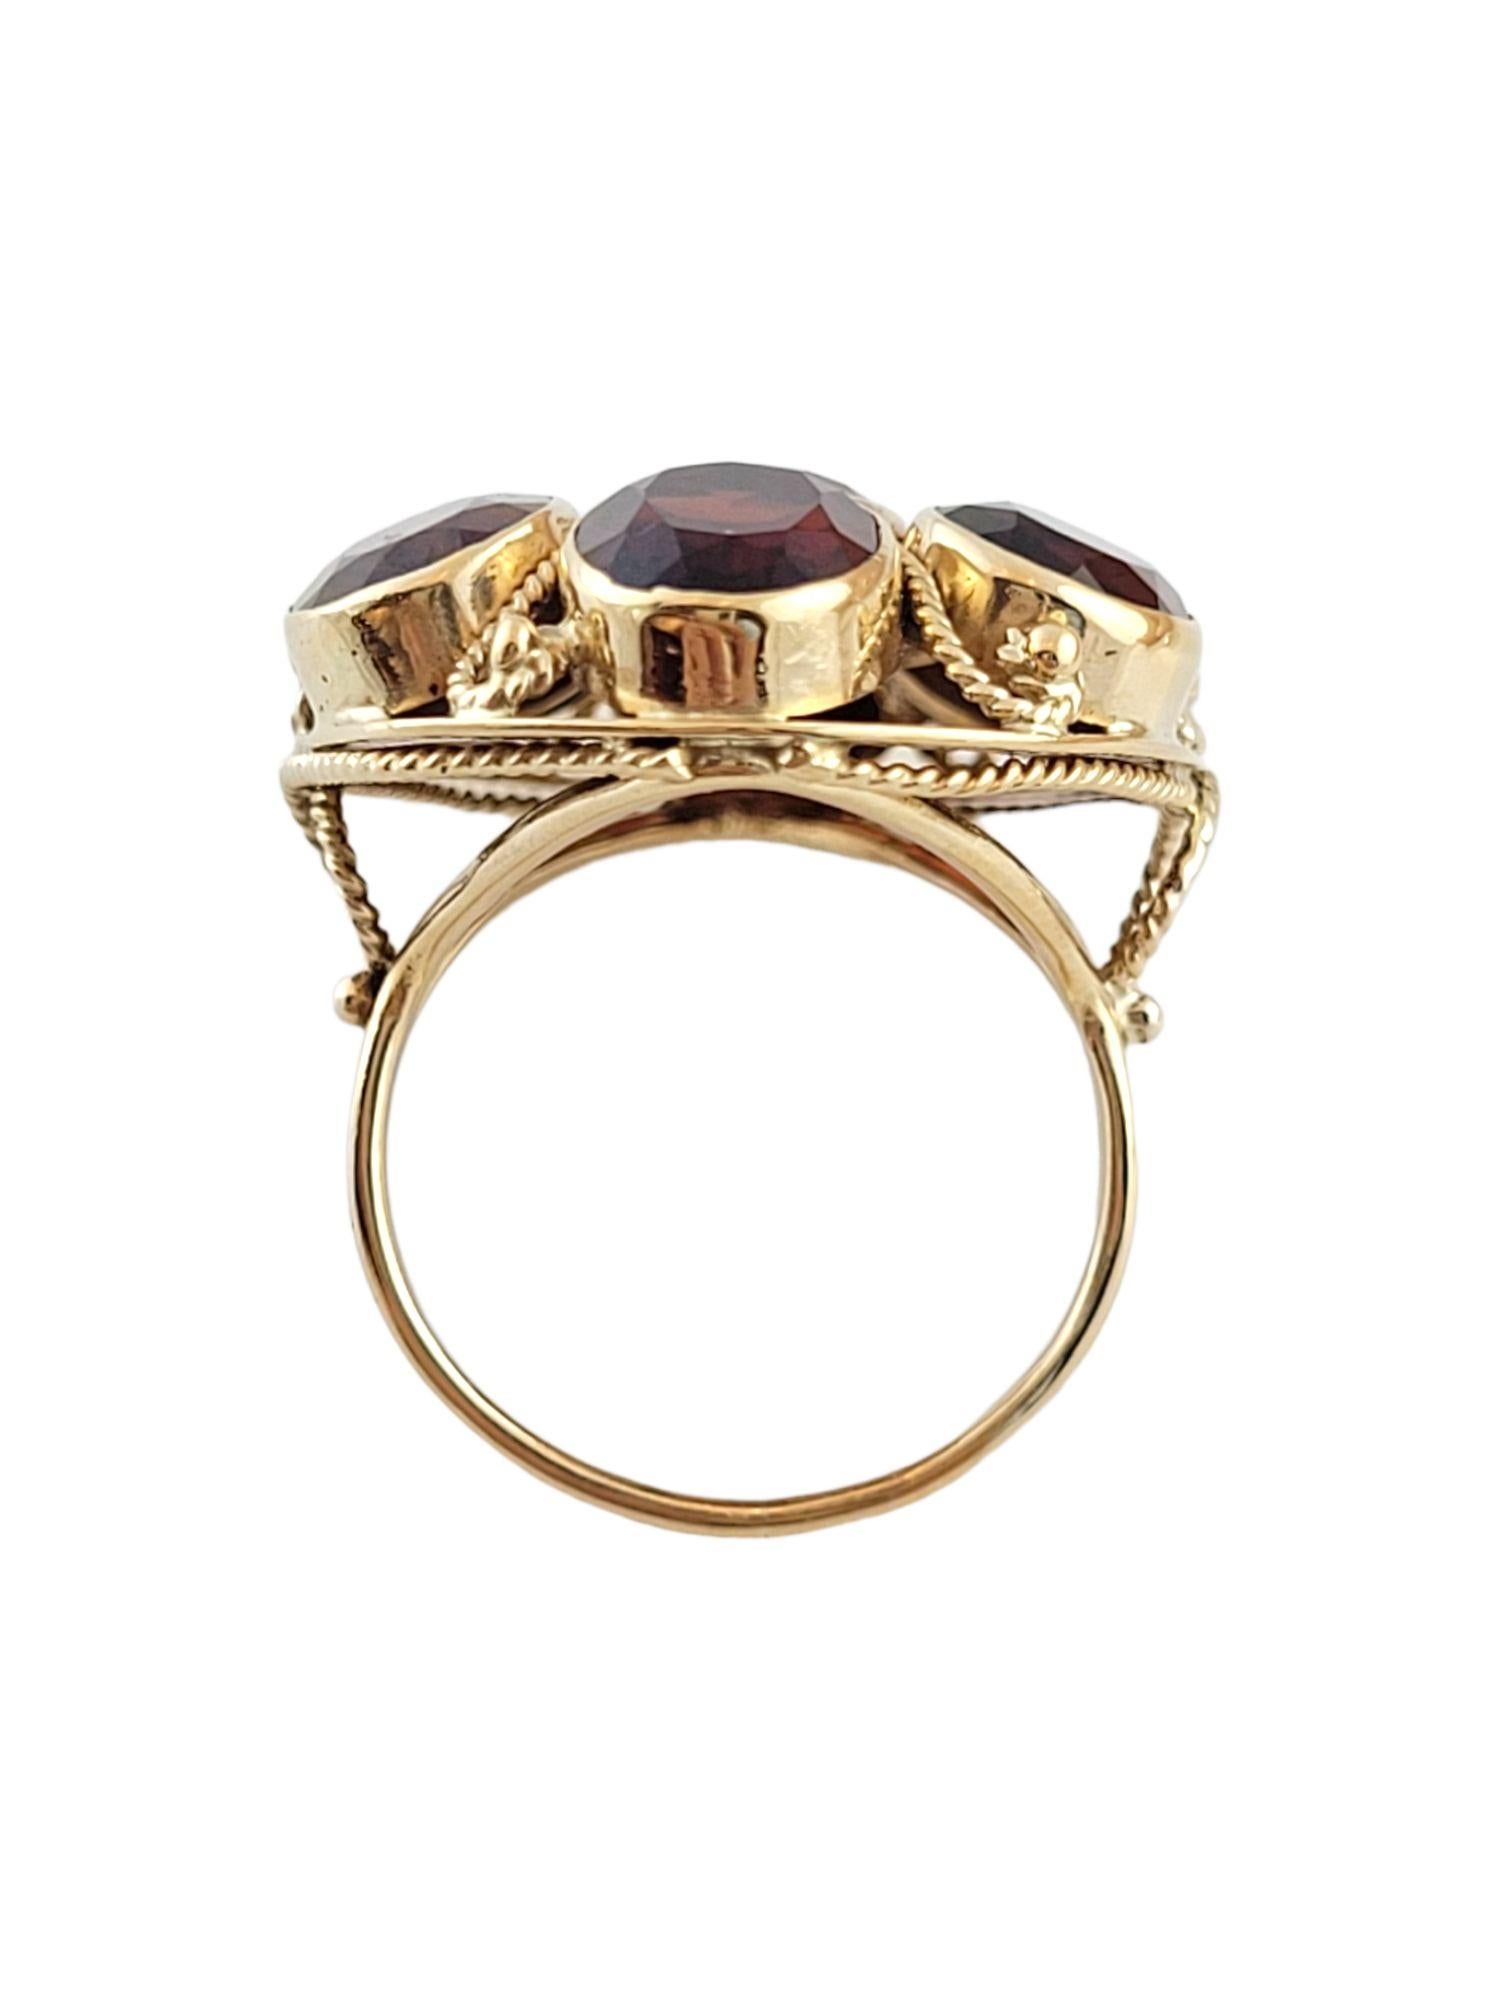 Oval Cut 14K Yellow Gold Almandine Garnet Cocktail Ring Size 6 #14774 For Sale